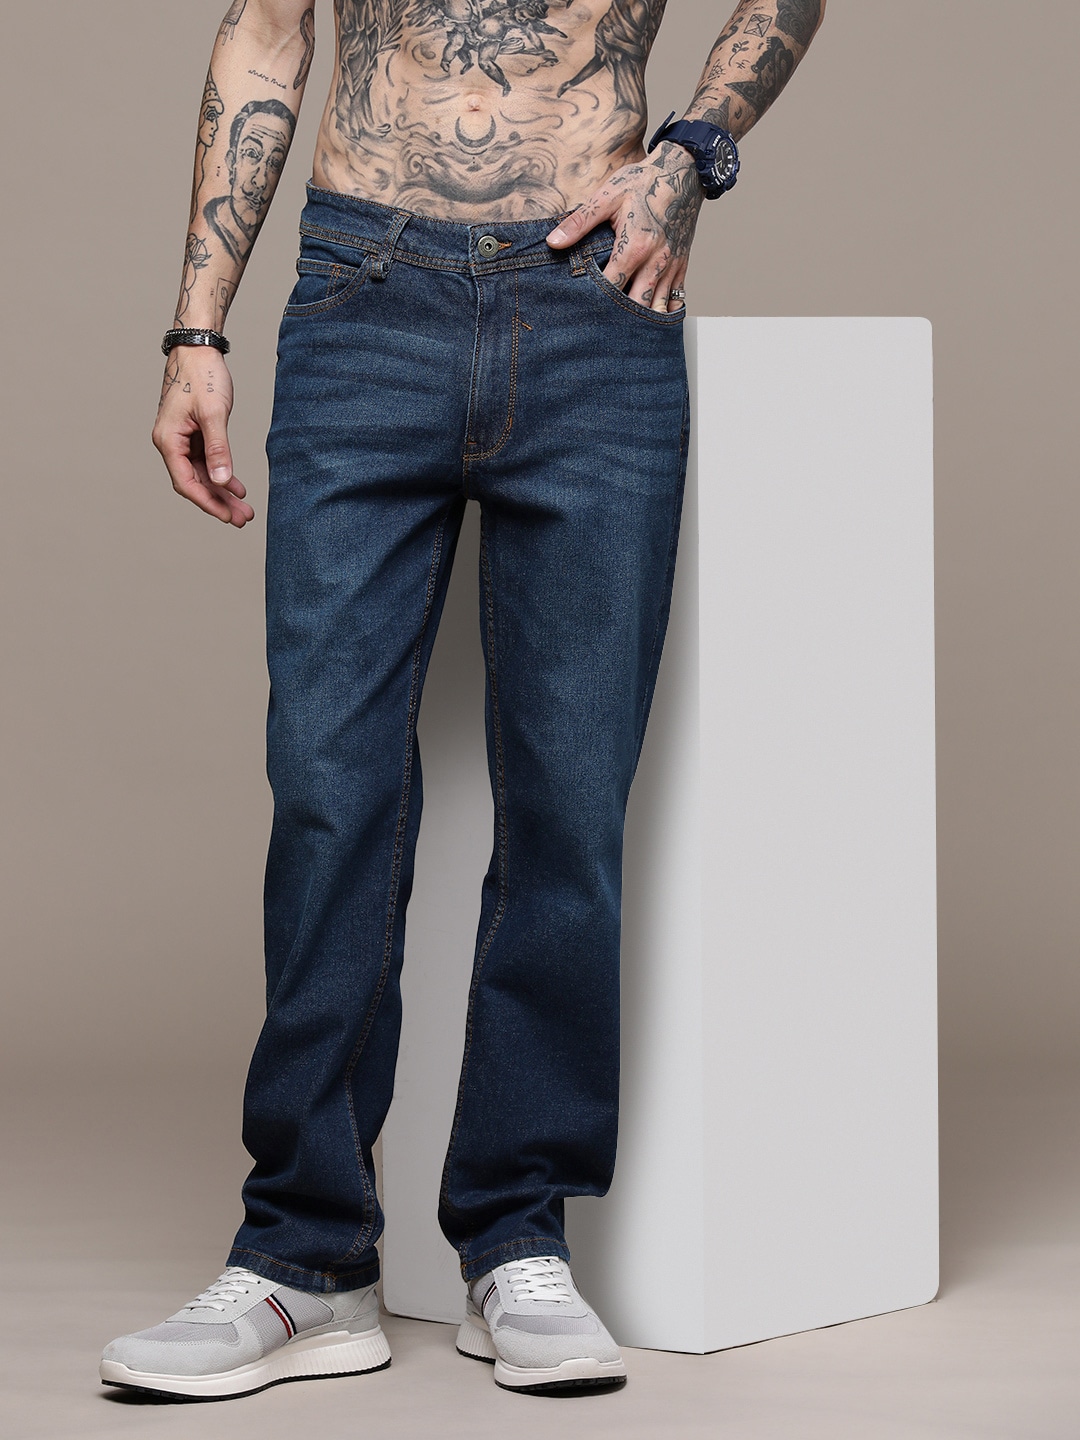 The Roadster Life Co. Men Light Fade Stretchable Jeans